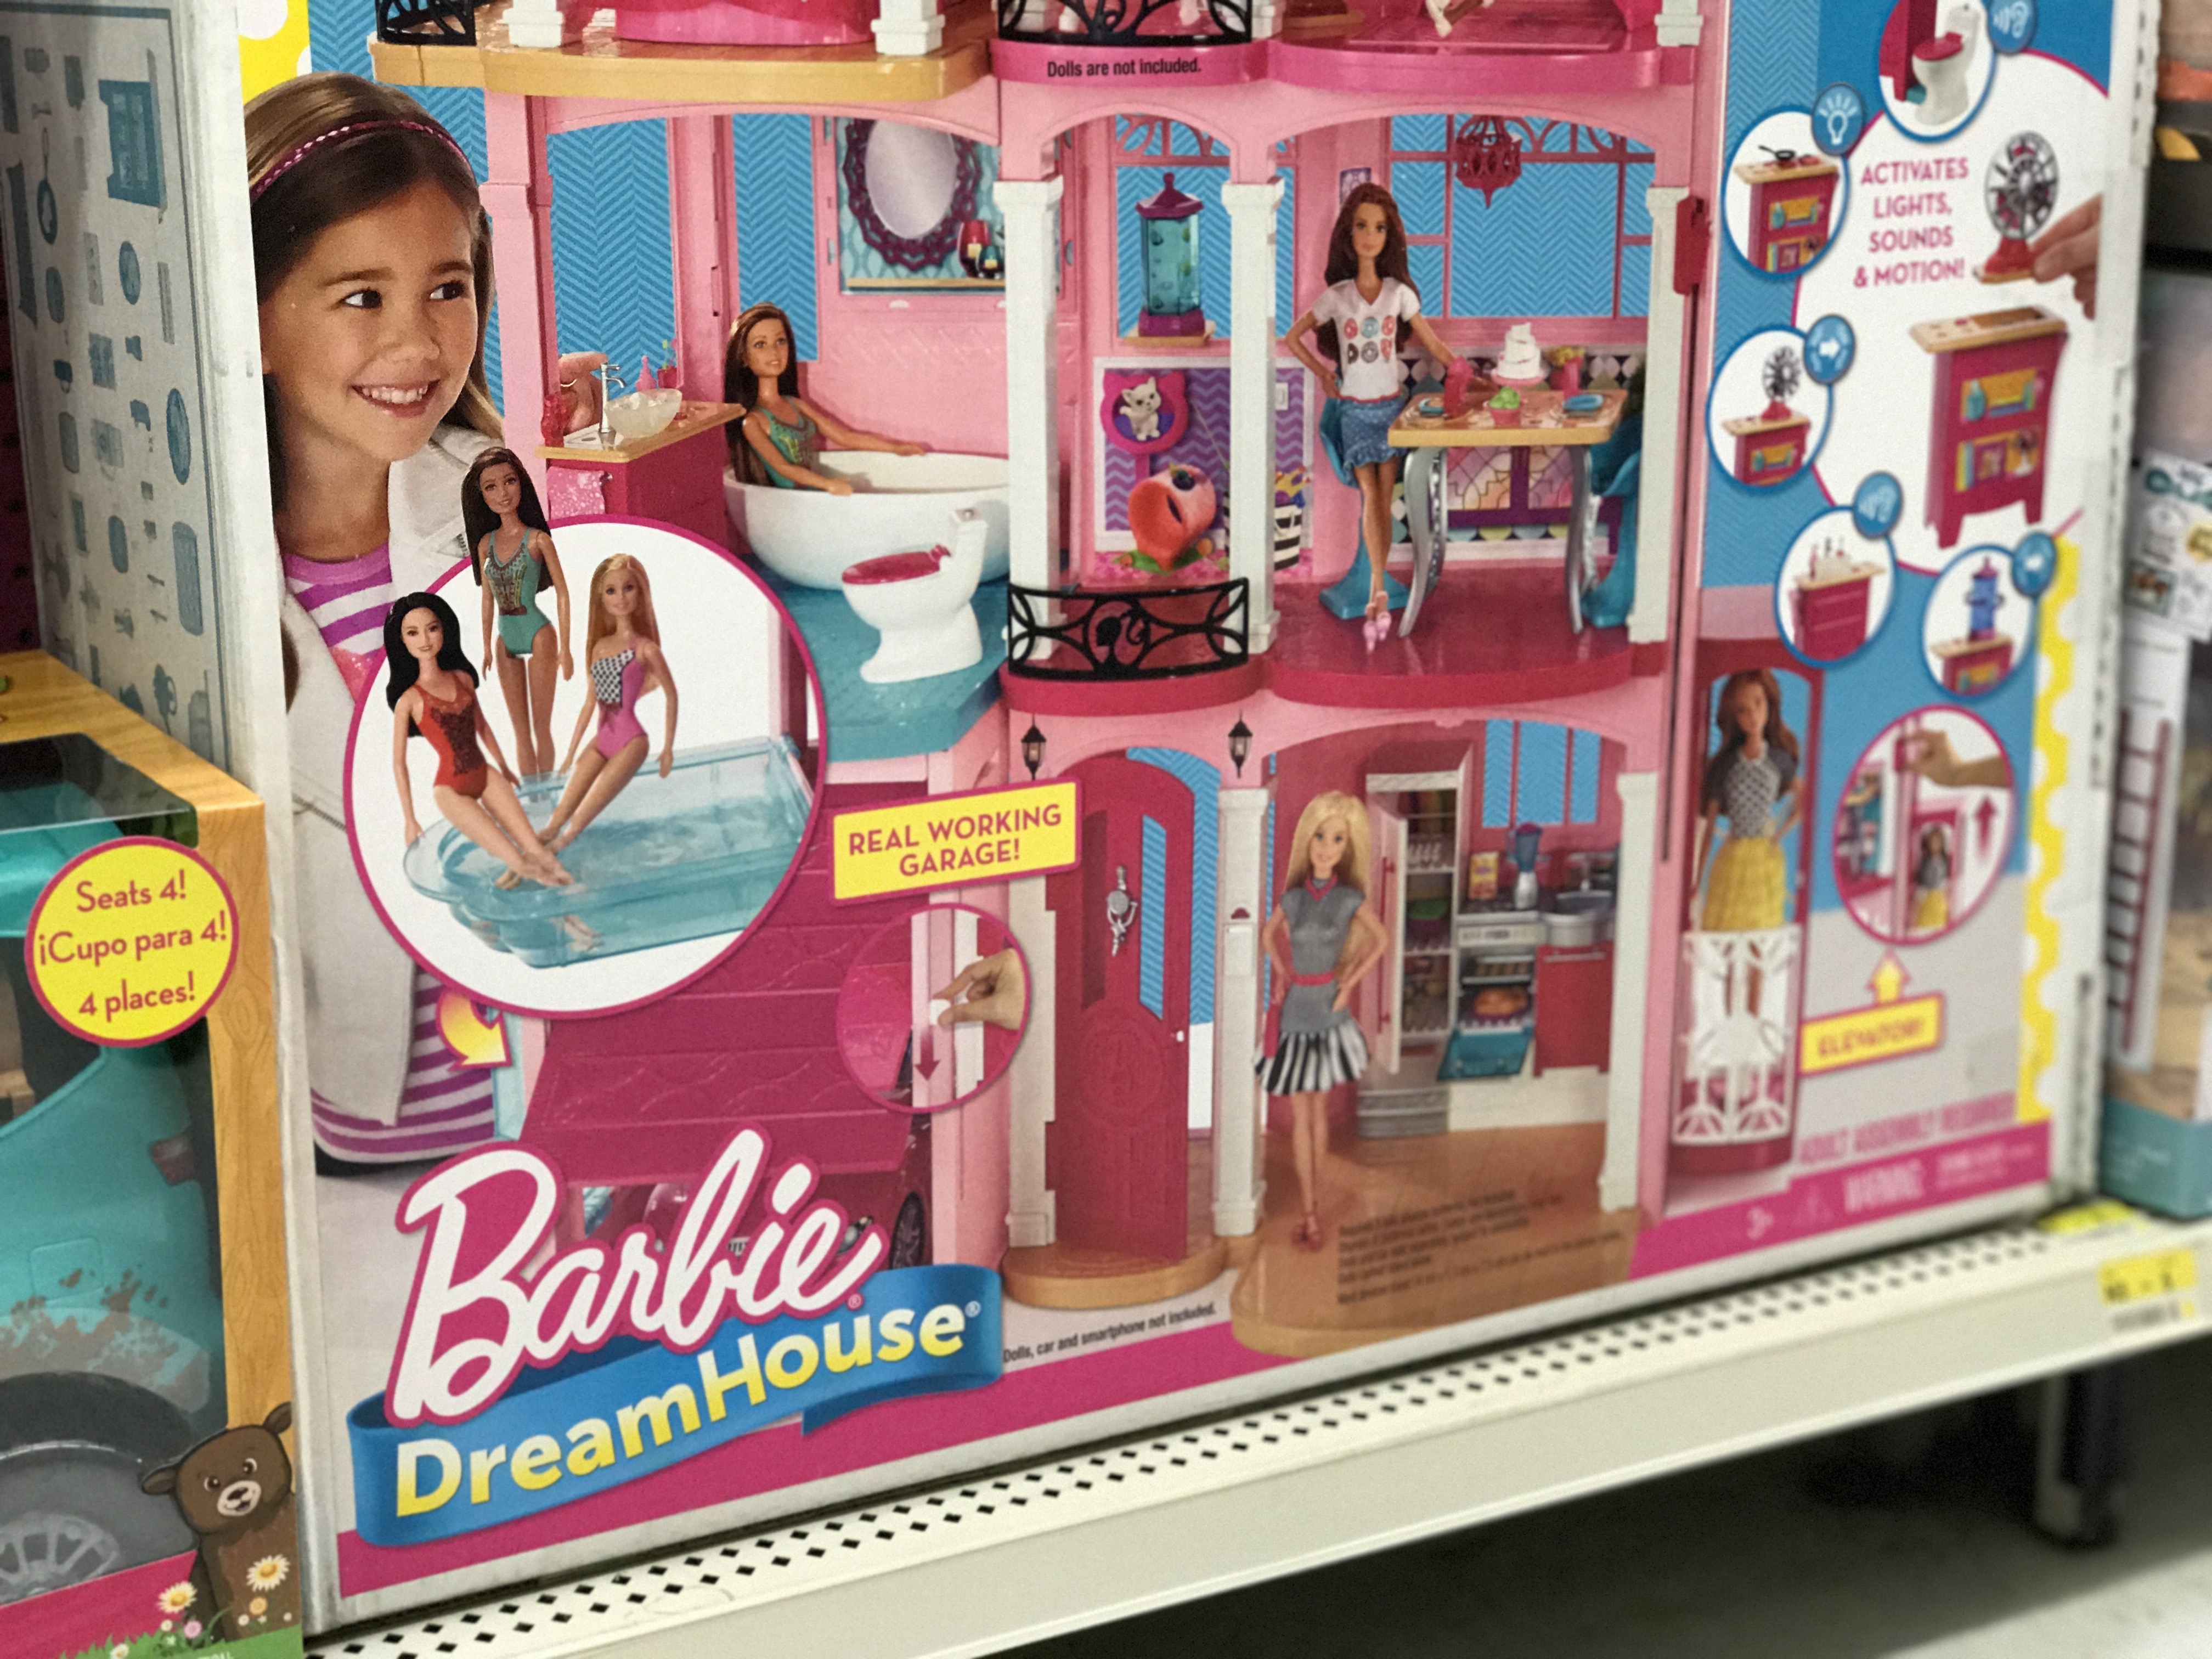 walmart black friday 2018 store changes include an expanded assortment of toys like this Barbie Dreamhouse